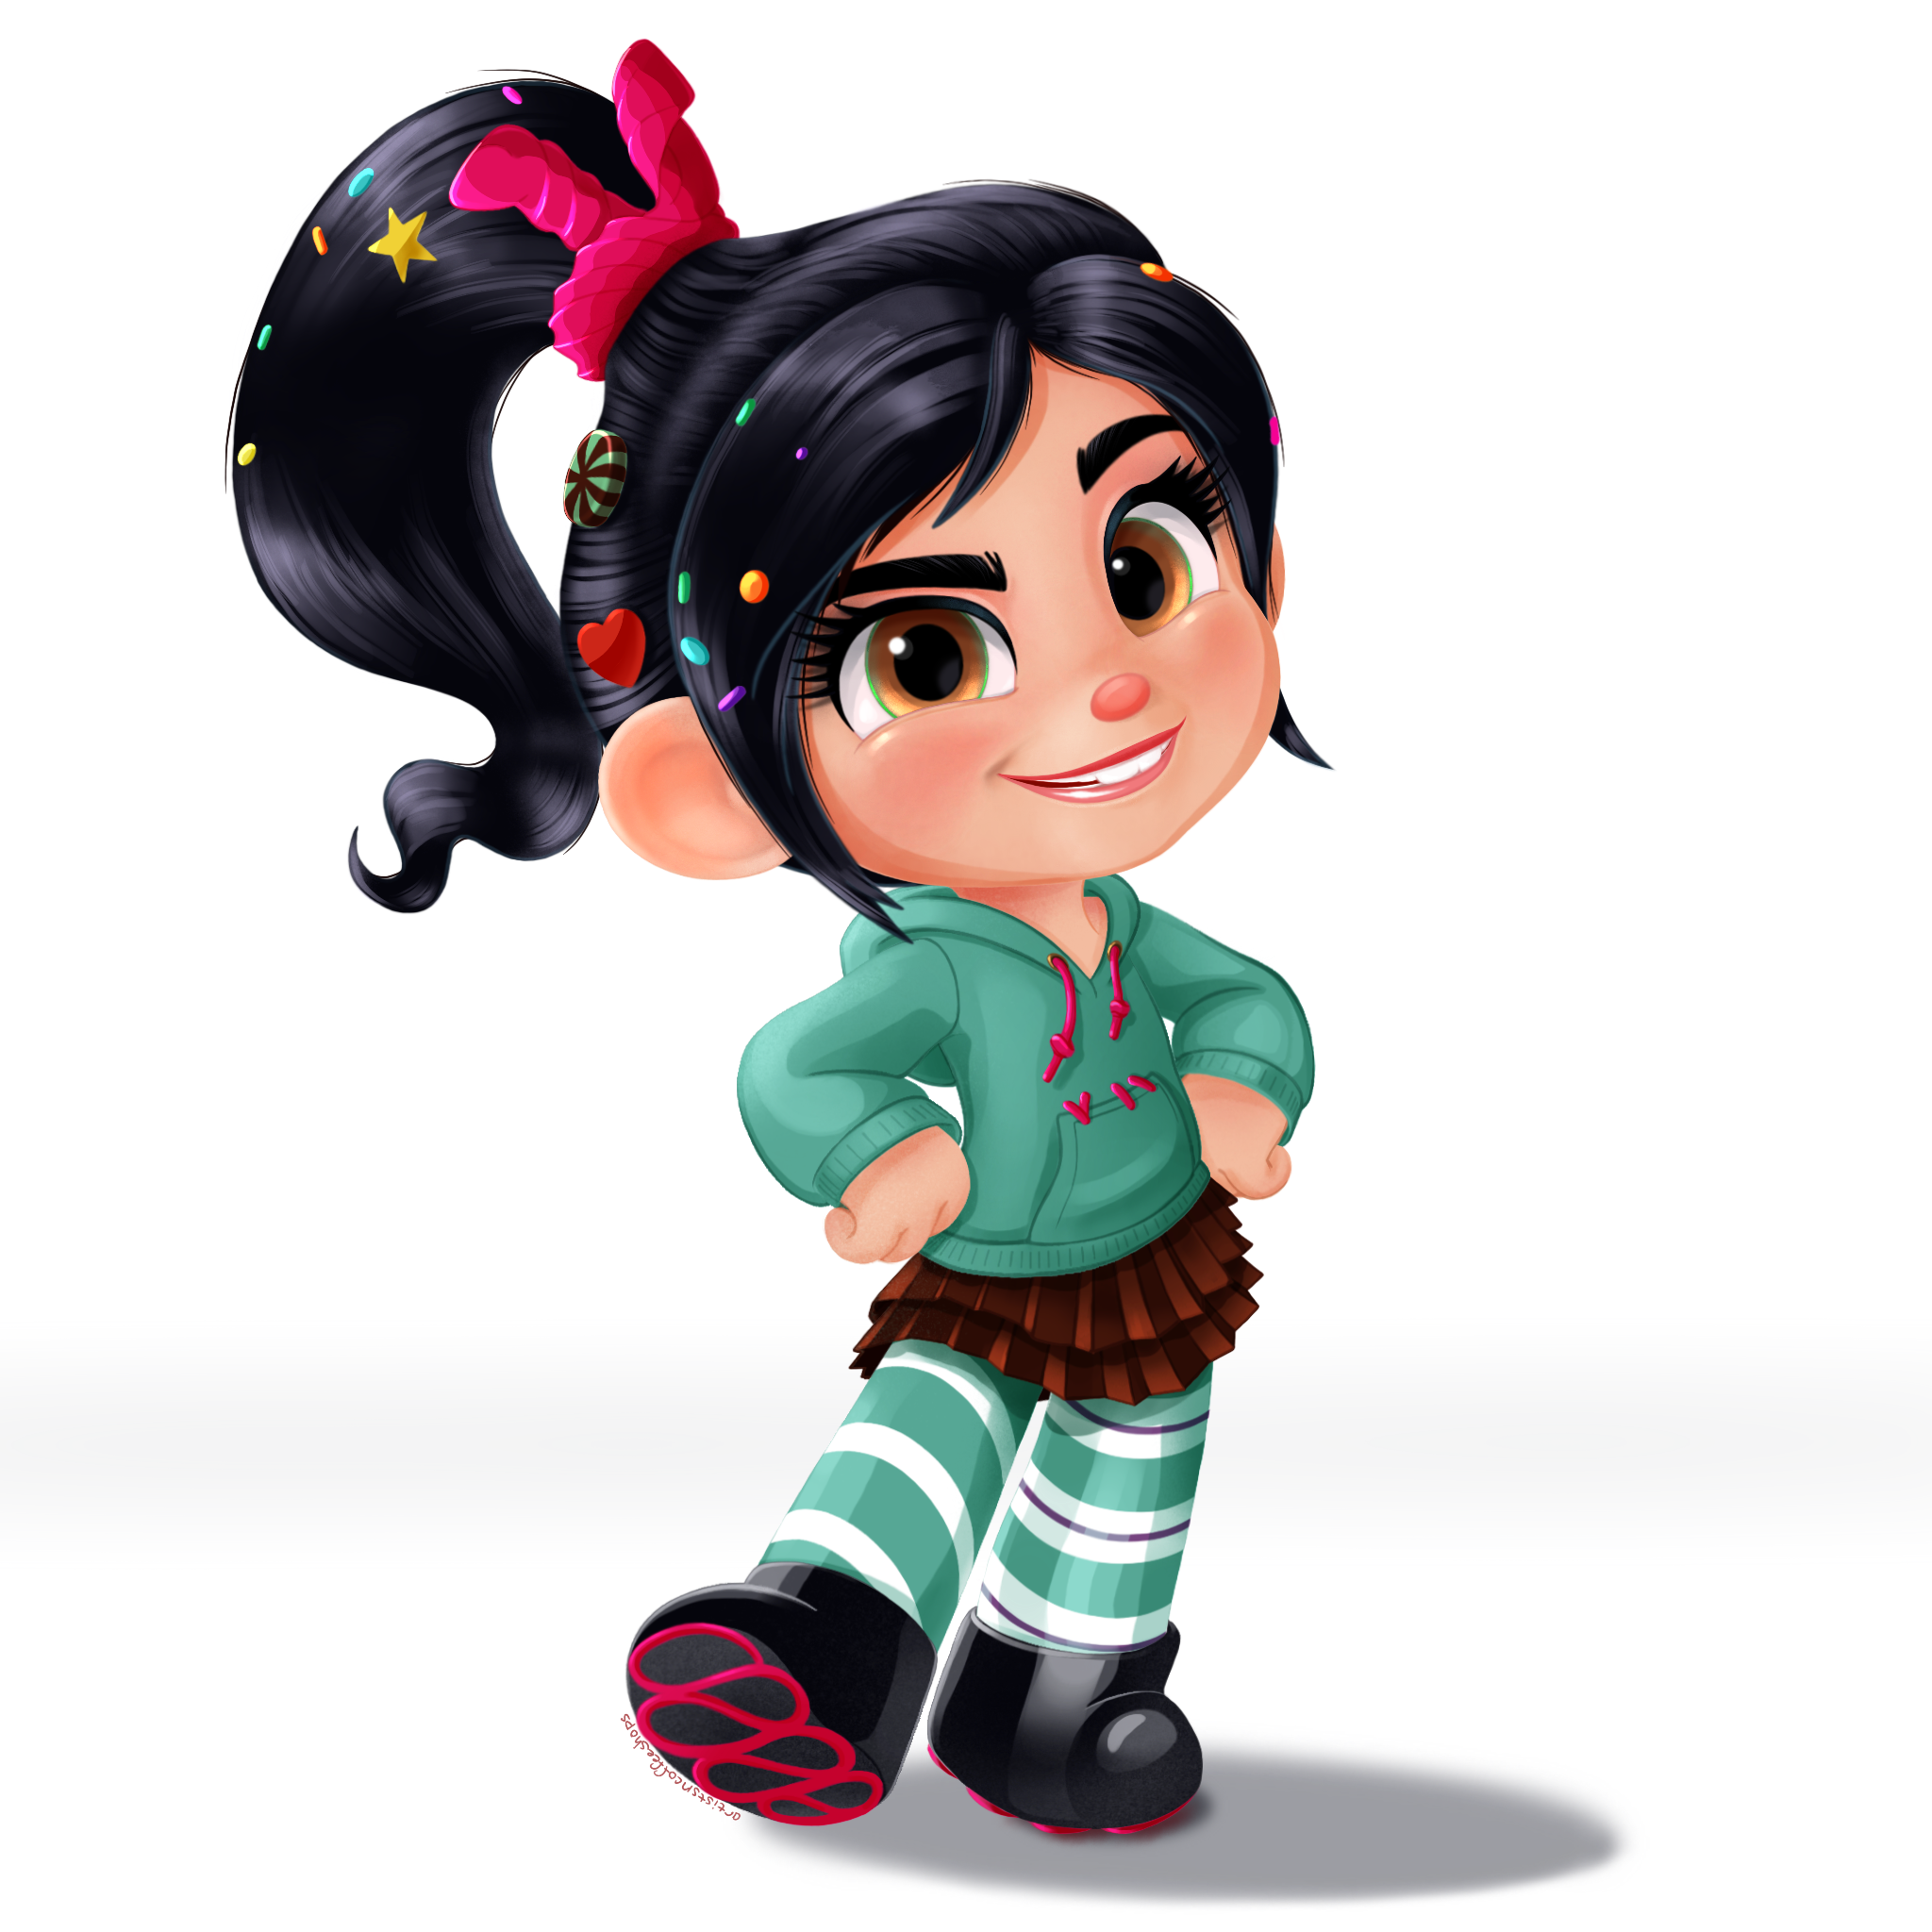 Vanellope - Cute and Sassy by artistsncoffeeshops on DeviantArt